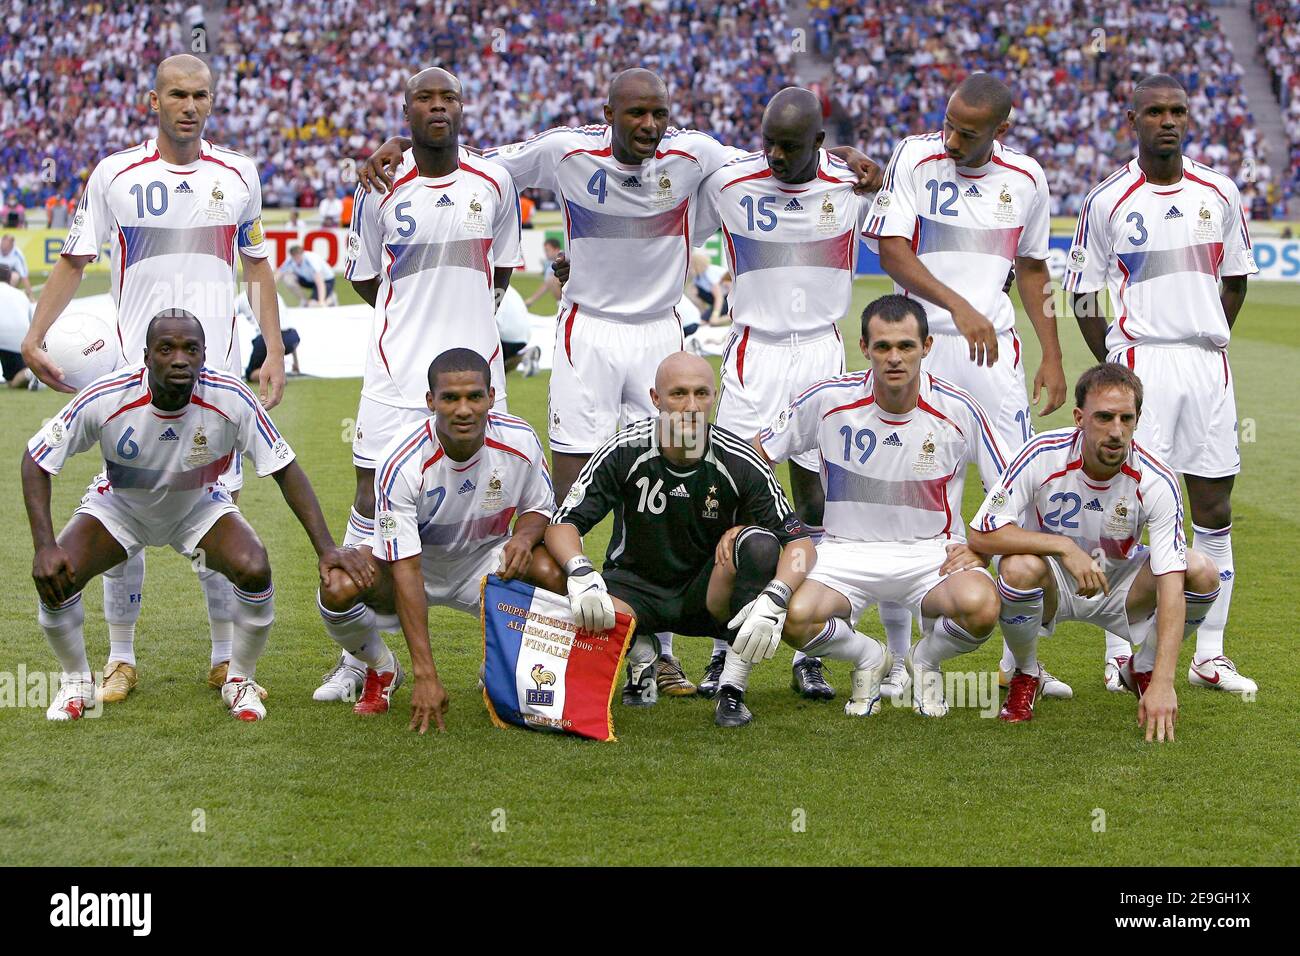 France's soccer team during the World Cup 2006, Final, Italy vs